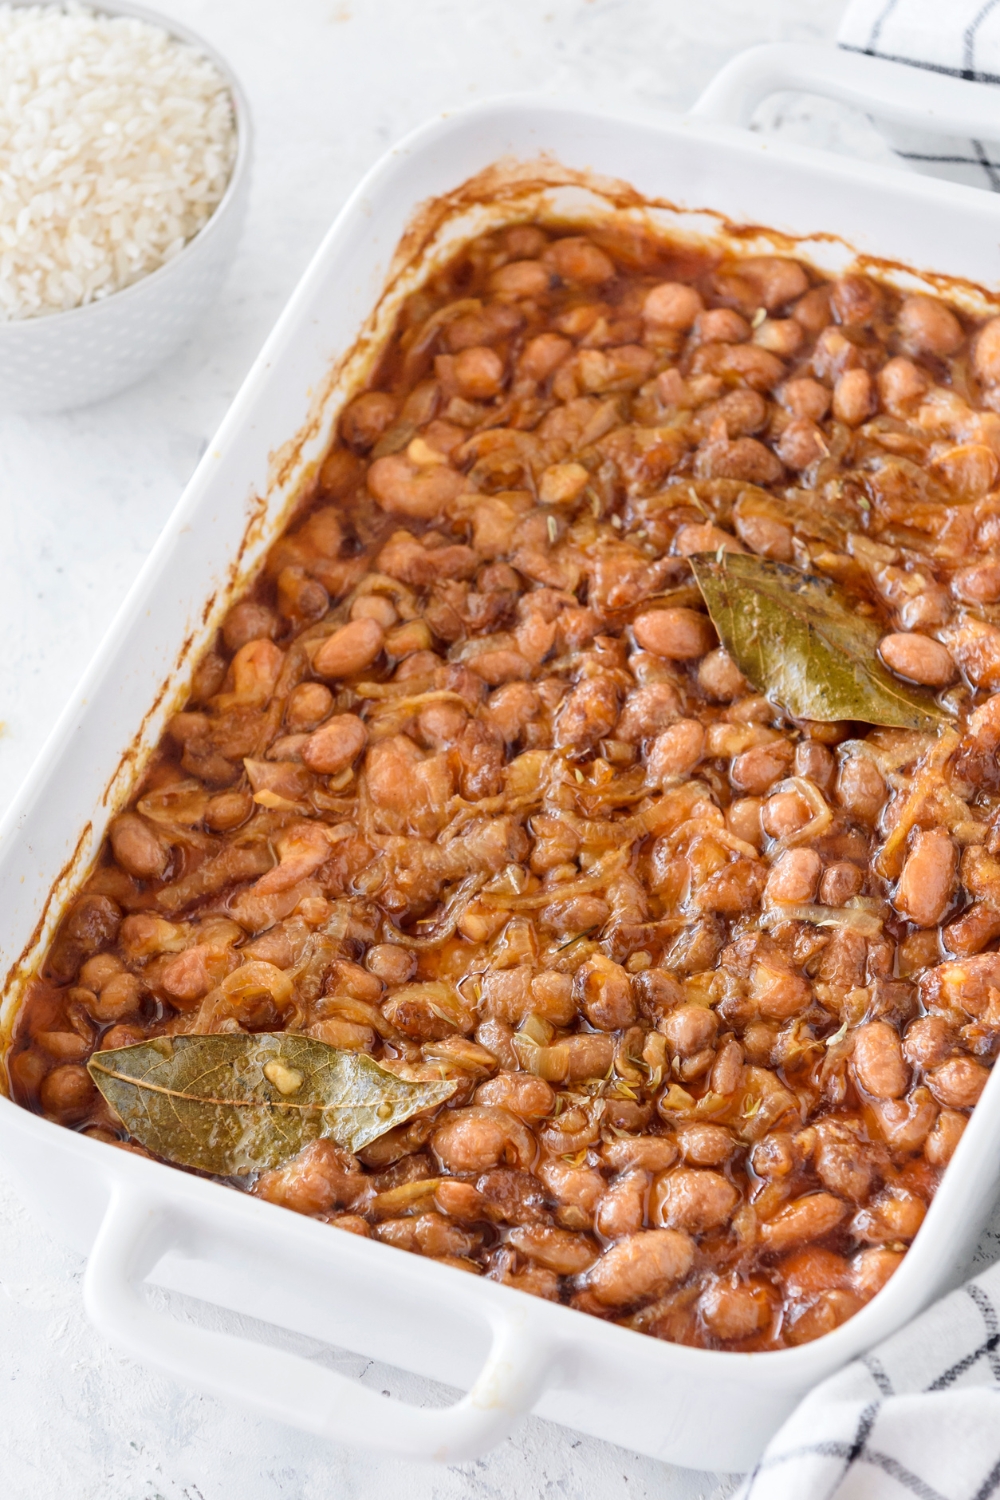 A baking dish filled with cooked pinto beans mixed with sautéed onions and two bay leaves.